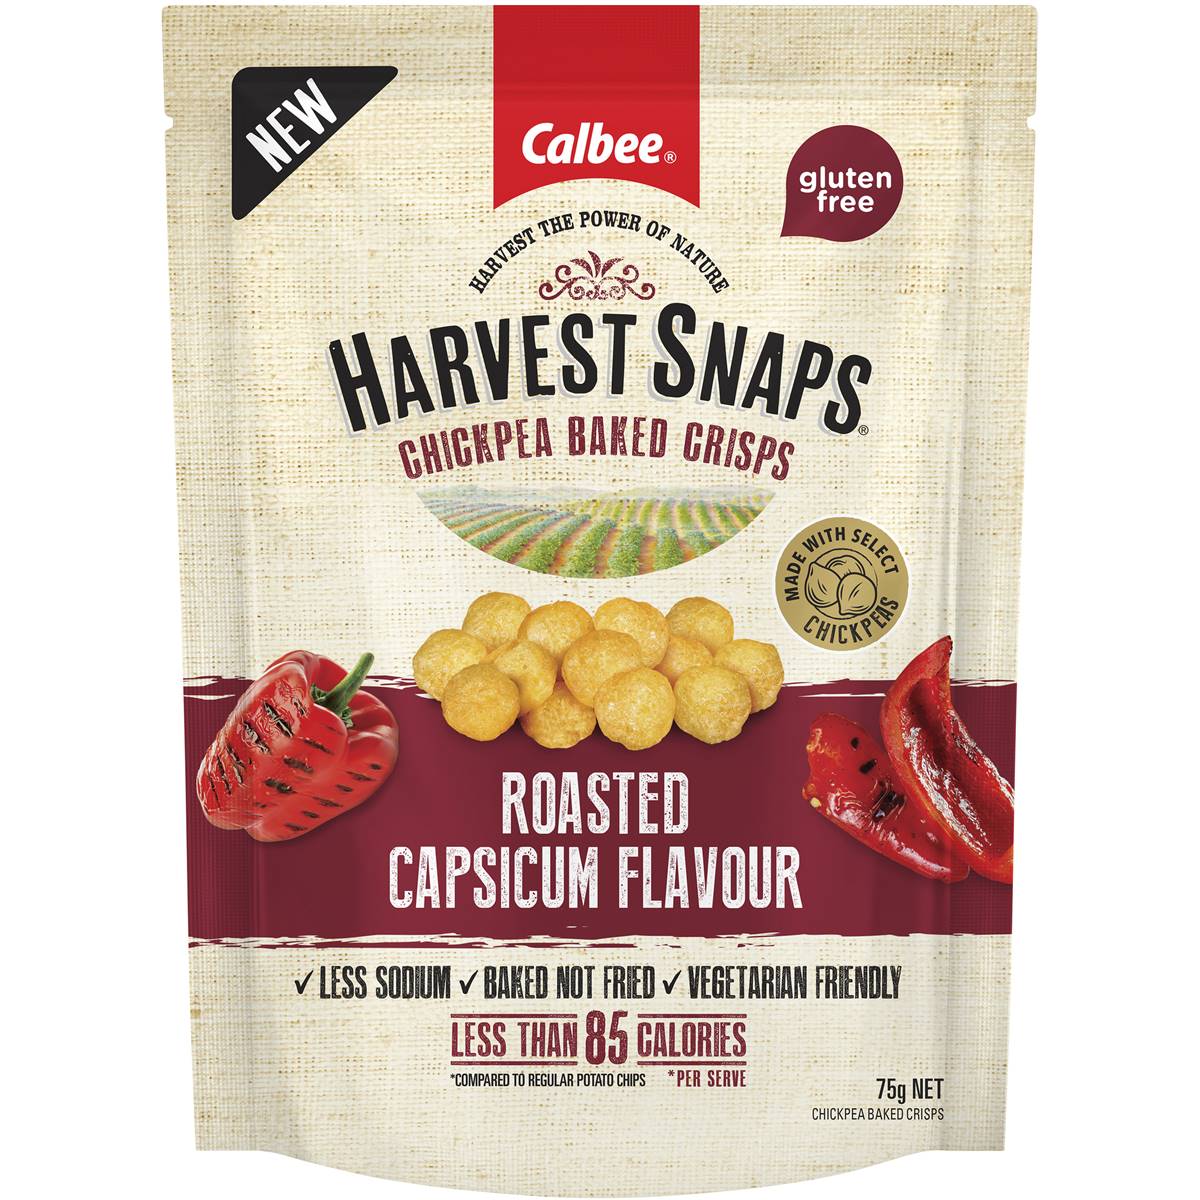 Calories in Calbee Harvest Snaps Chickpea Roasted Capsicum Baked Crisps